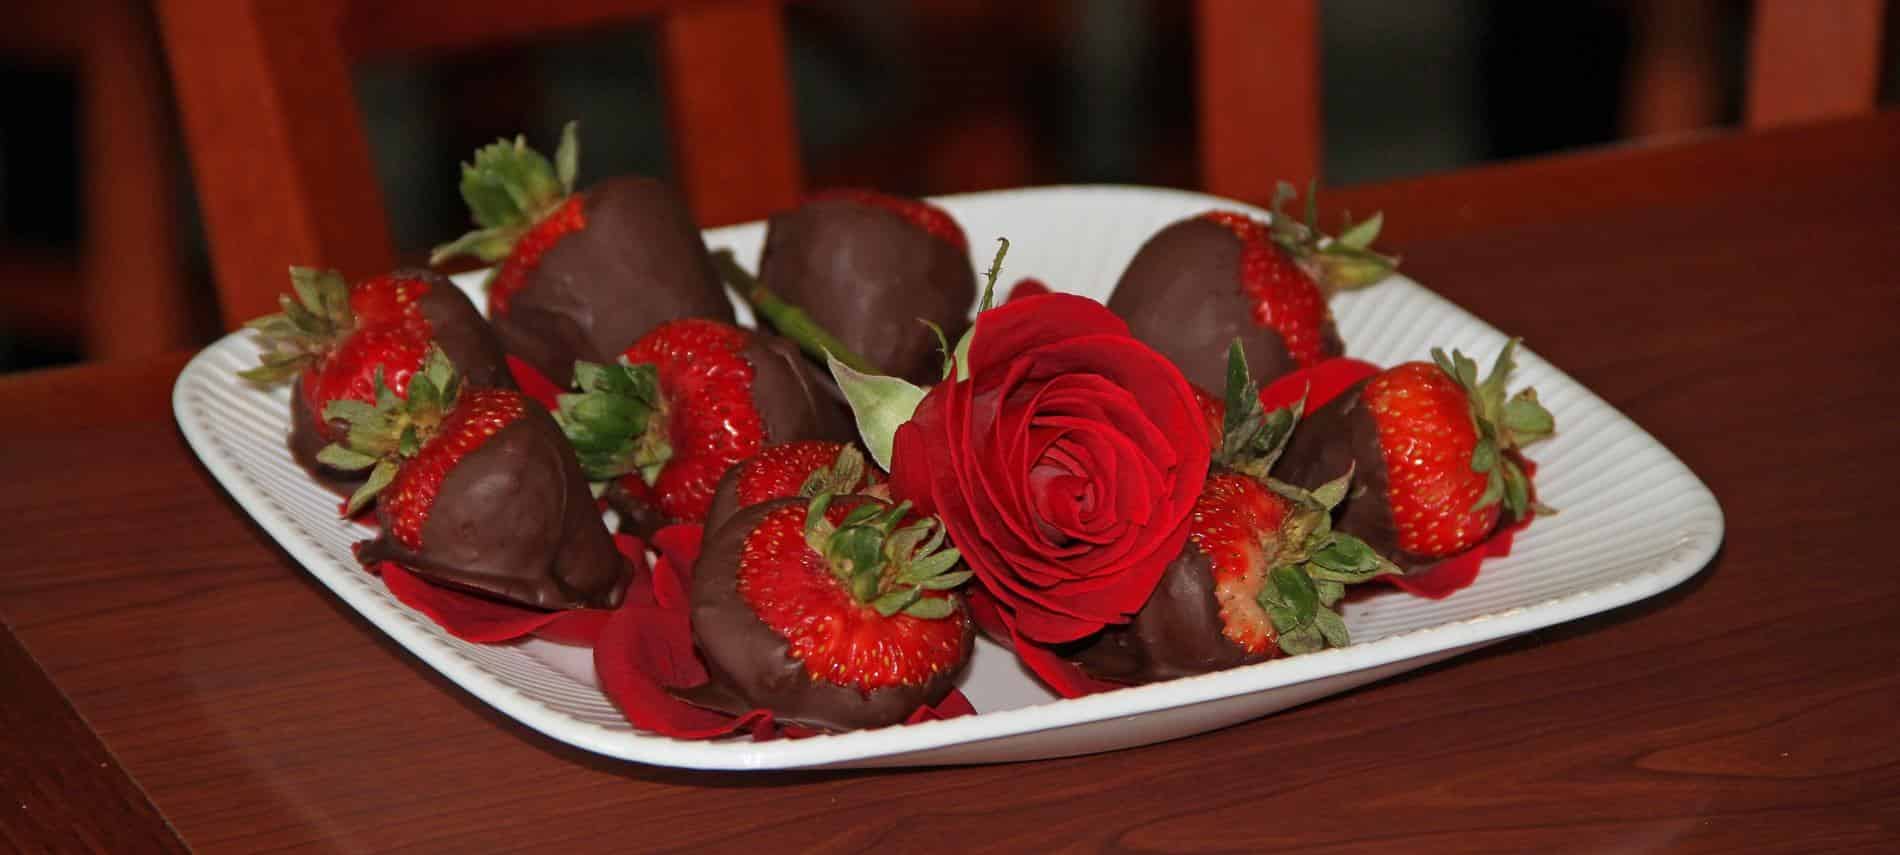 White tray topped with red strawberries with green stems dipped in chocolate on a bed of red rose petals and one red rose